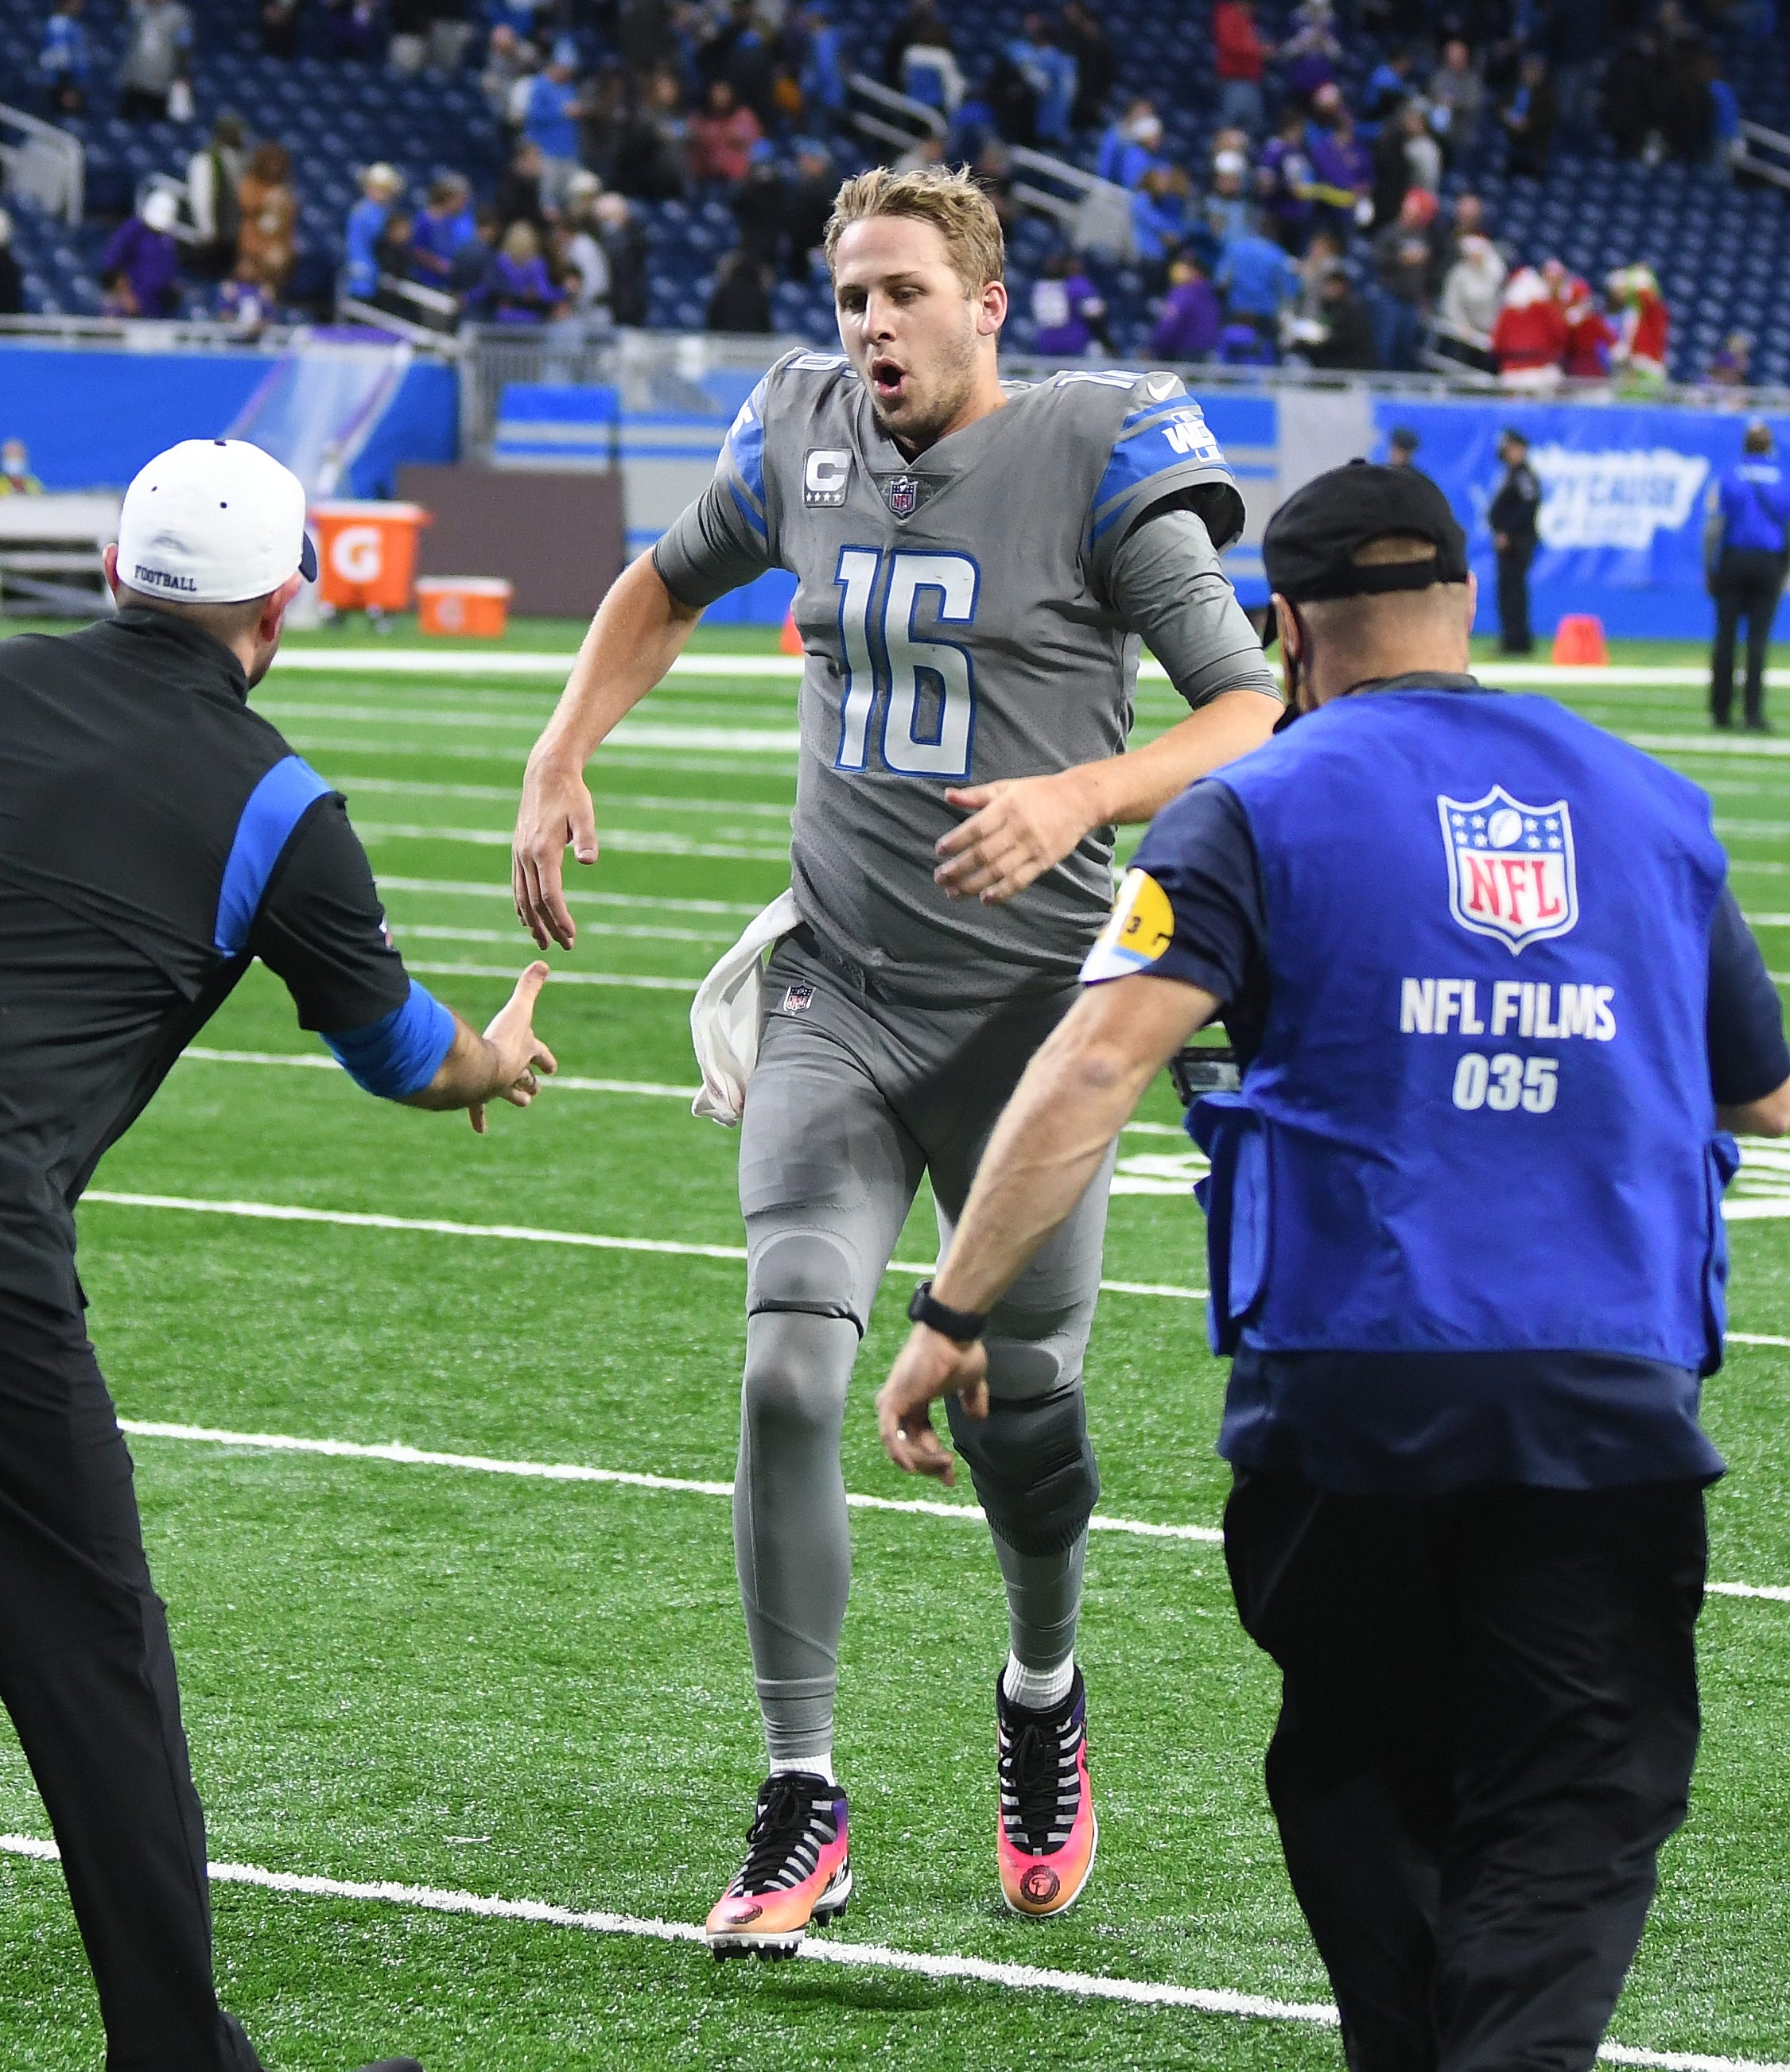 Lions quarterback Jared Goff lets out a breath as he leaves the field with Detroit's first victory of the year, 29-27 over the Minnesota Vikings.